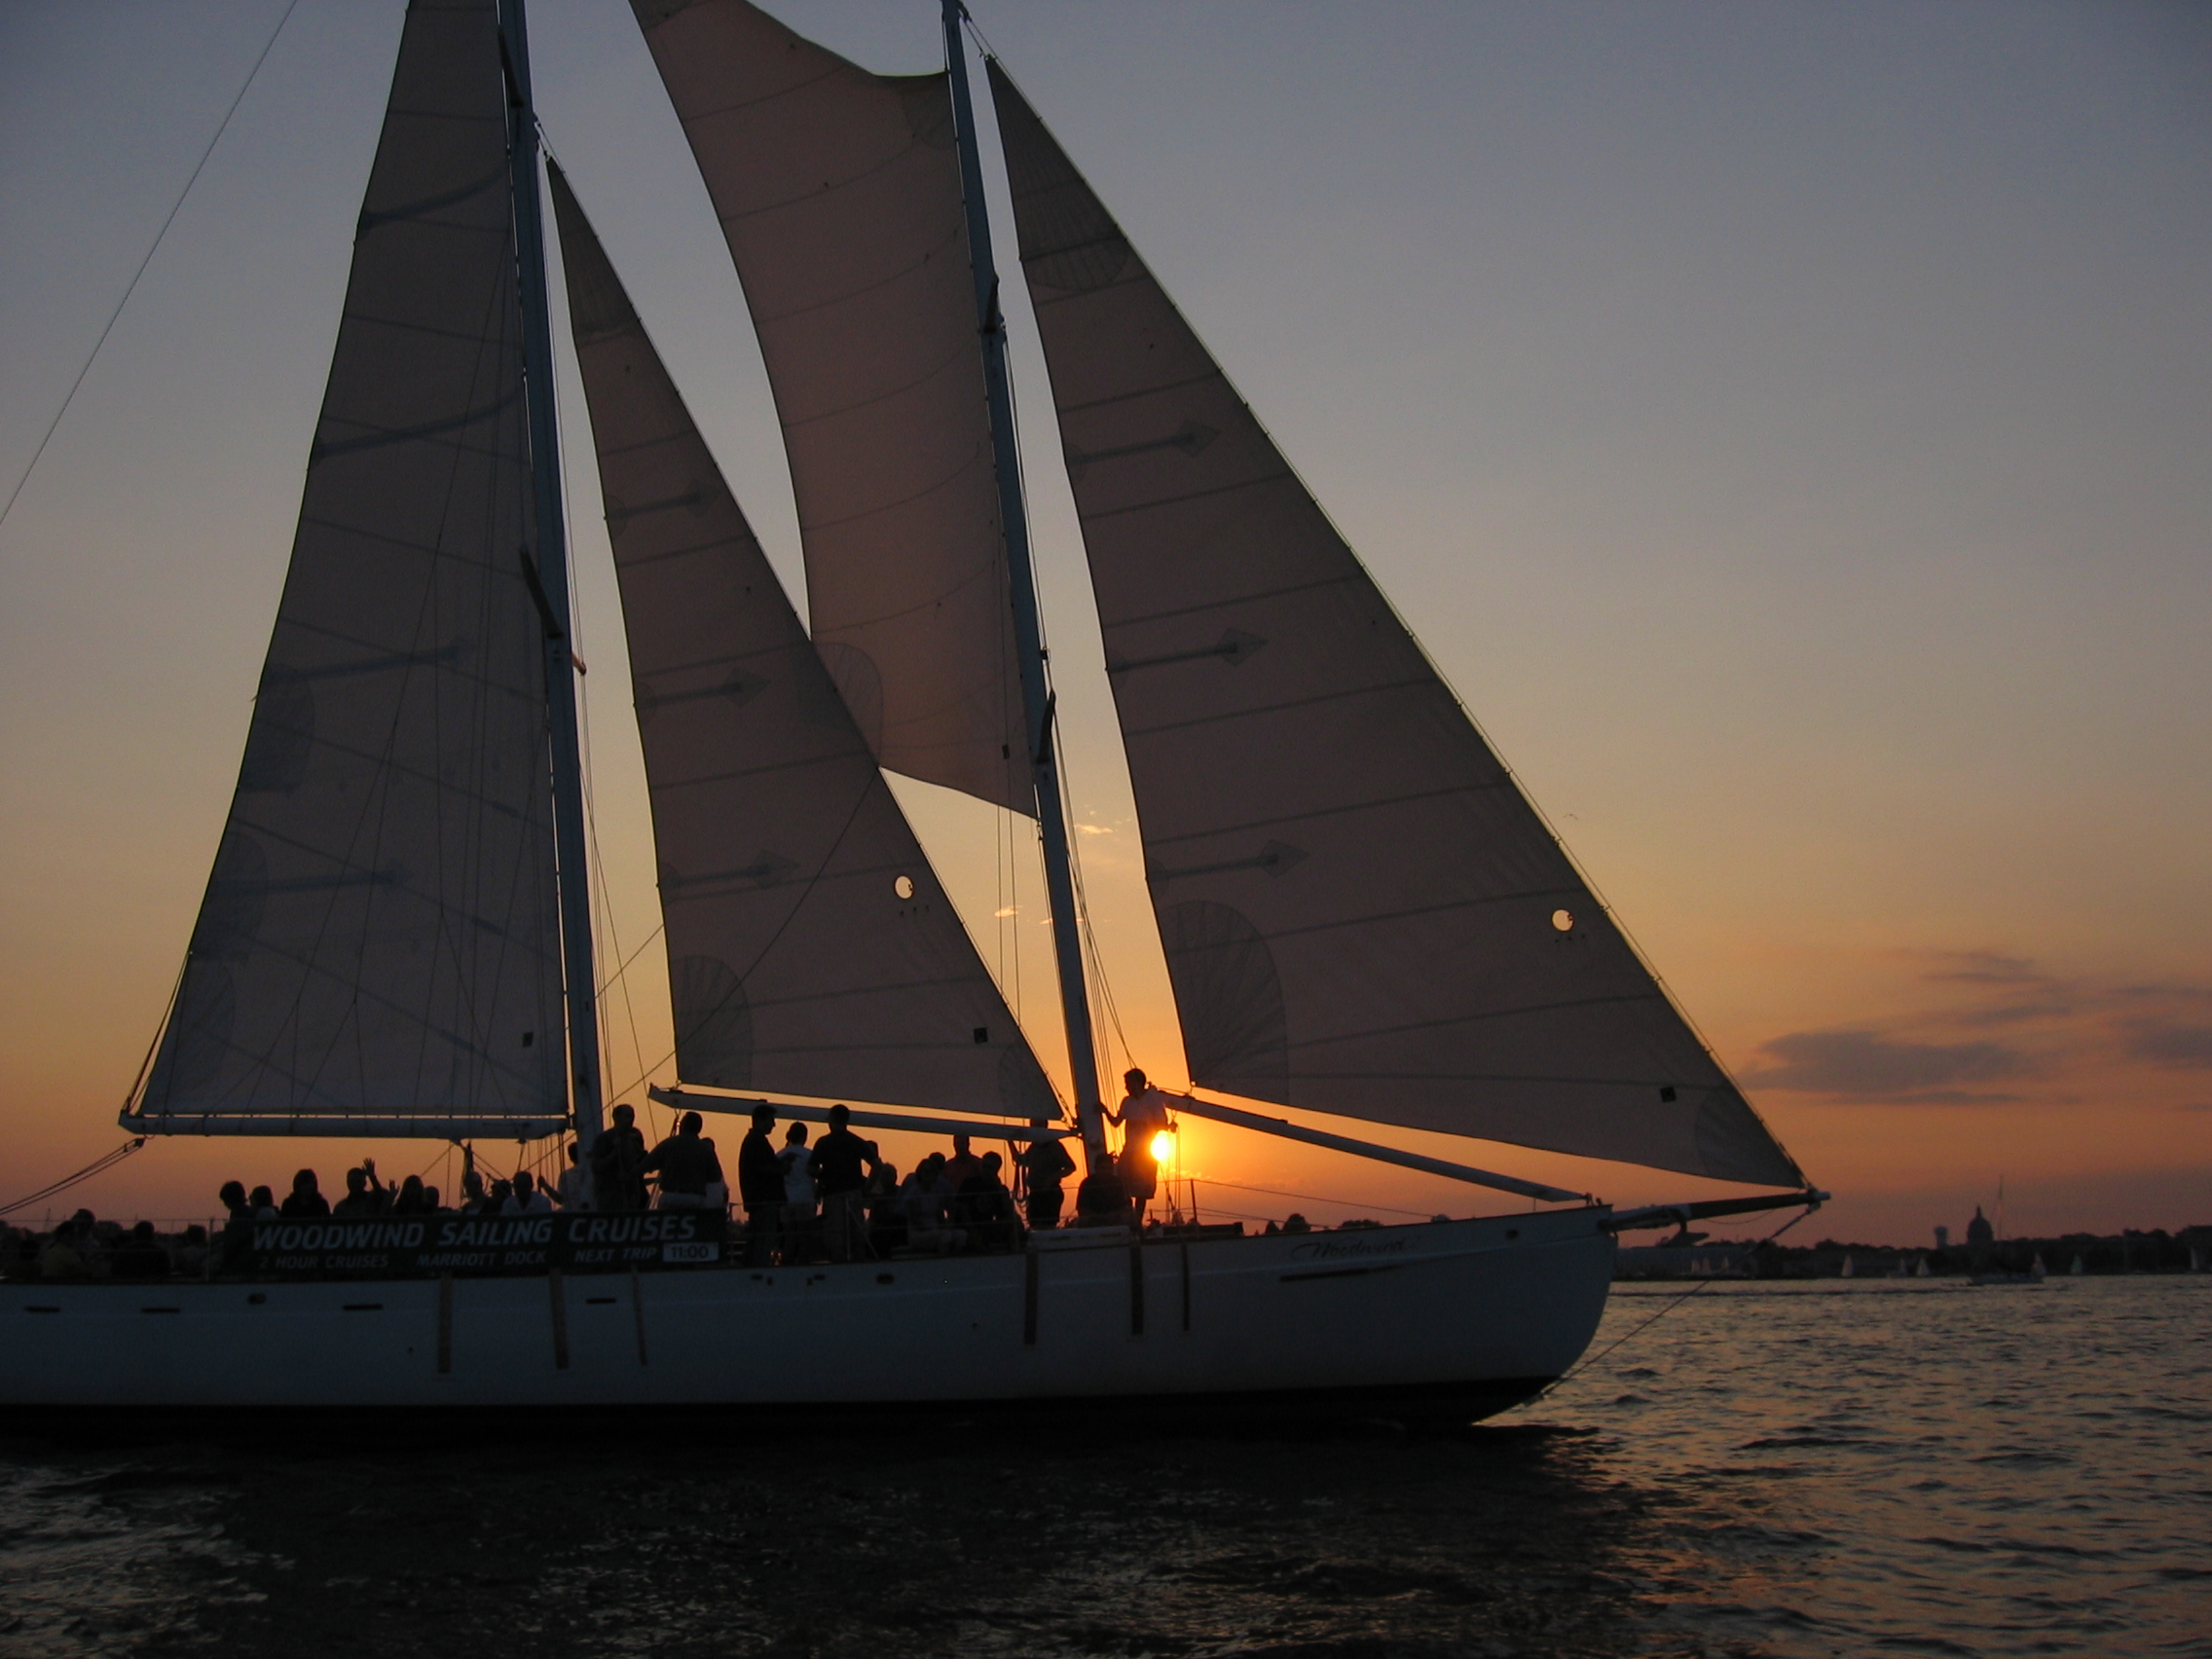 Schooner Woodwind sailing into the sunset